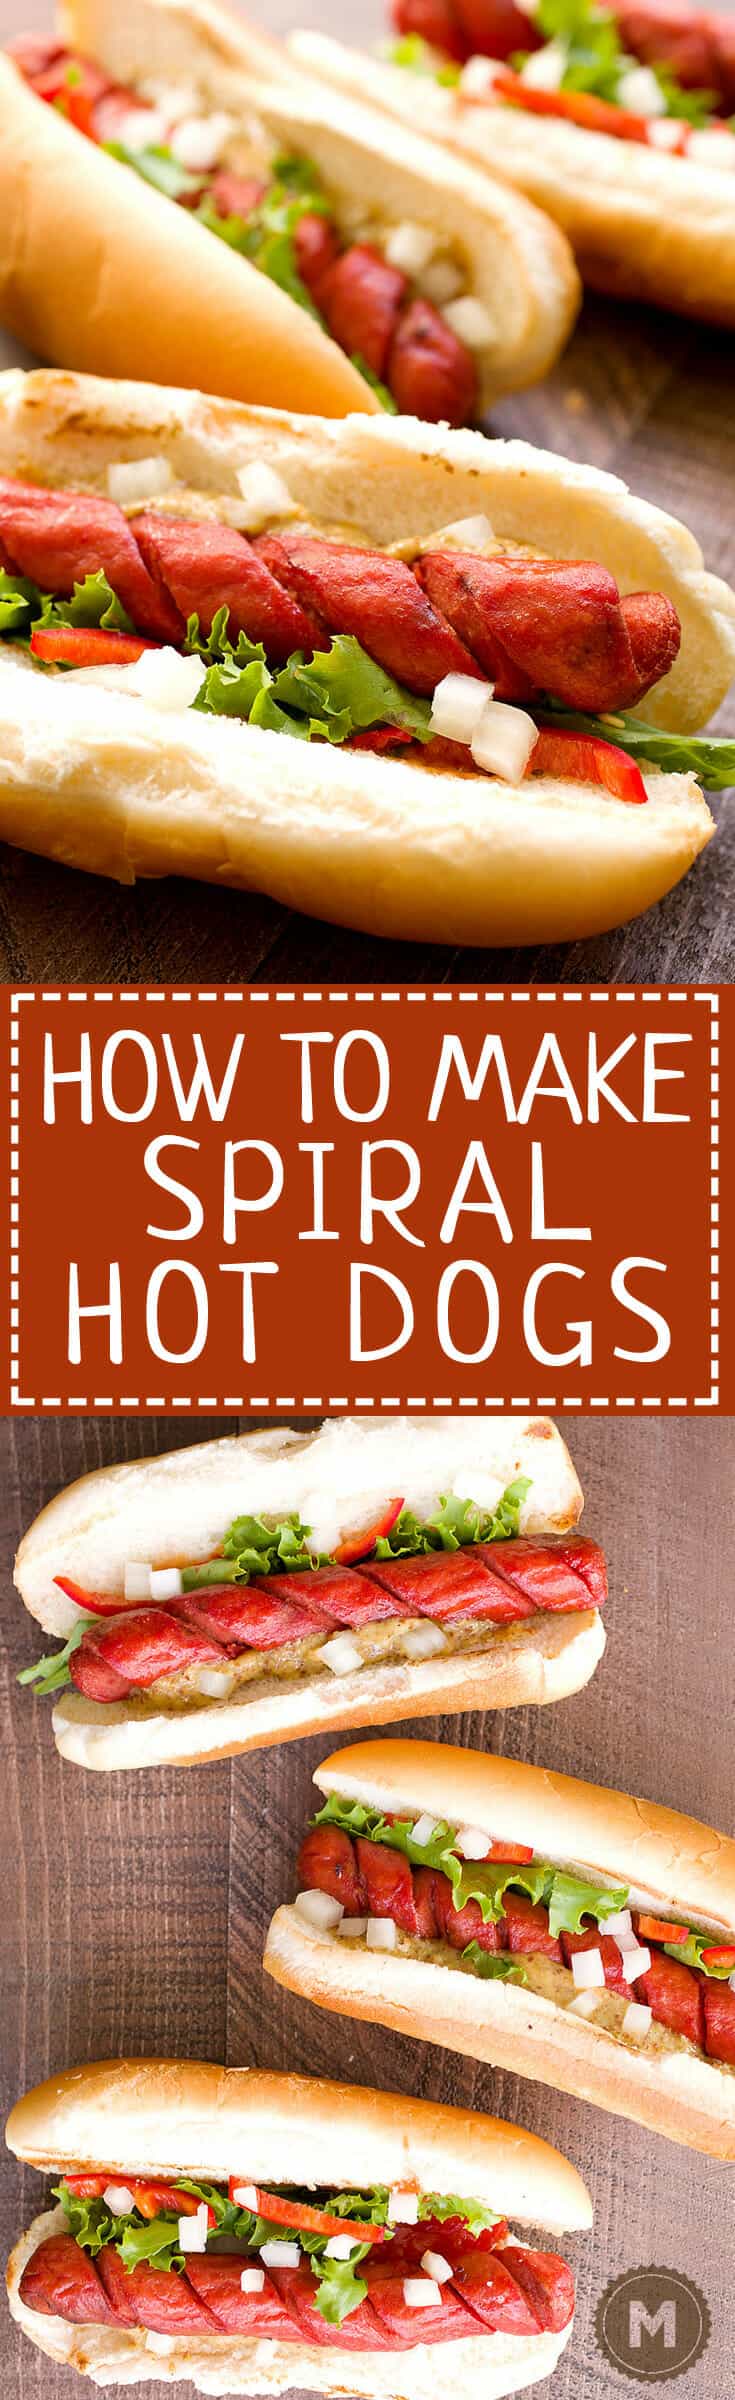 How to Make Spiral Hot Dogs: You are one quick tip away from completely changing your grilling game this year. This fast prep takes your average hot dog to a whole new level. They get crispy and perfect for lazy day grilling. Learn how to do it right! | macheesmo.com